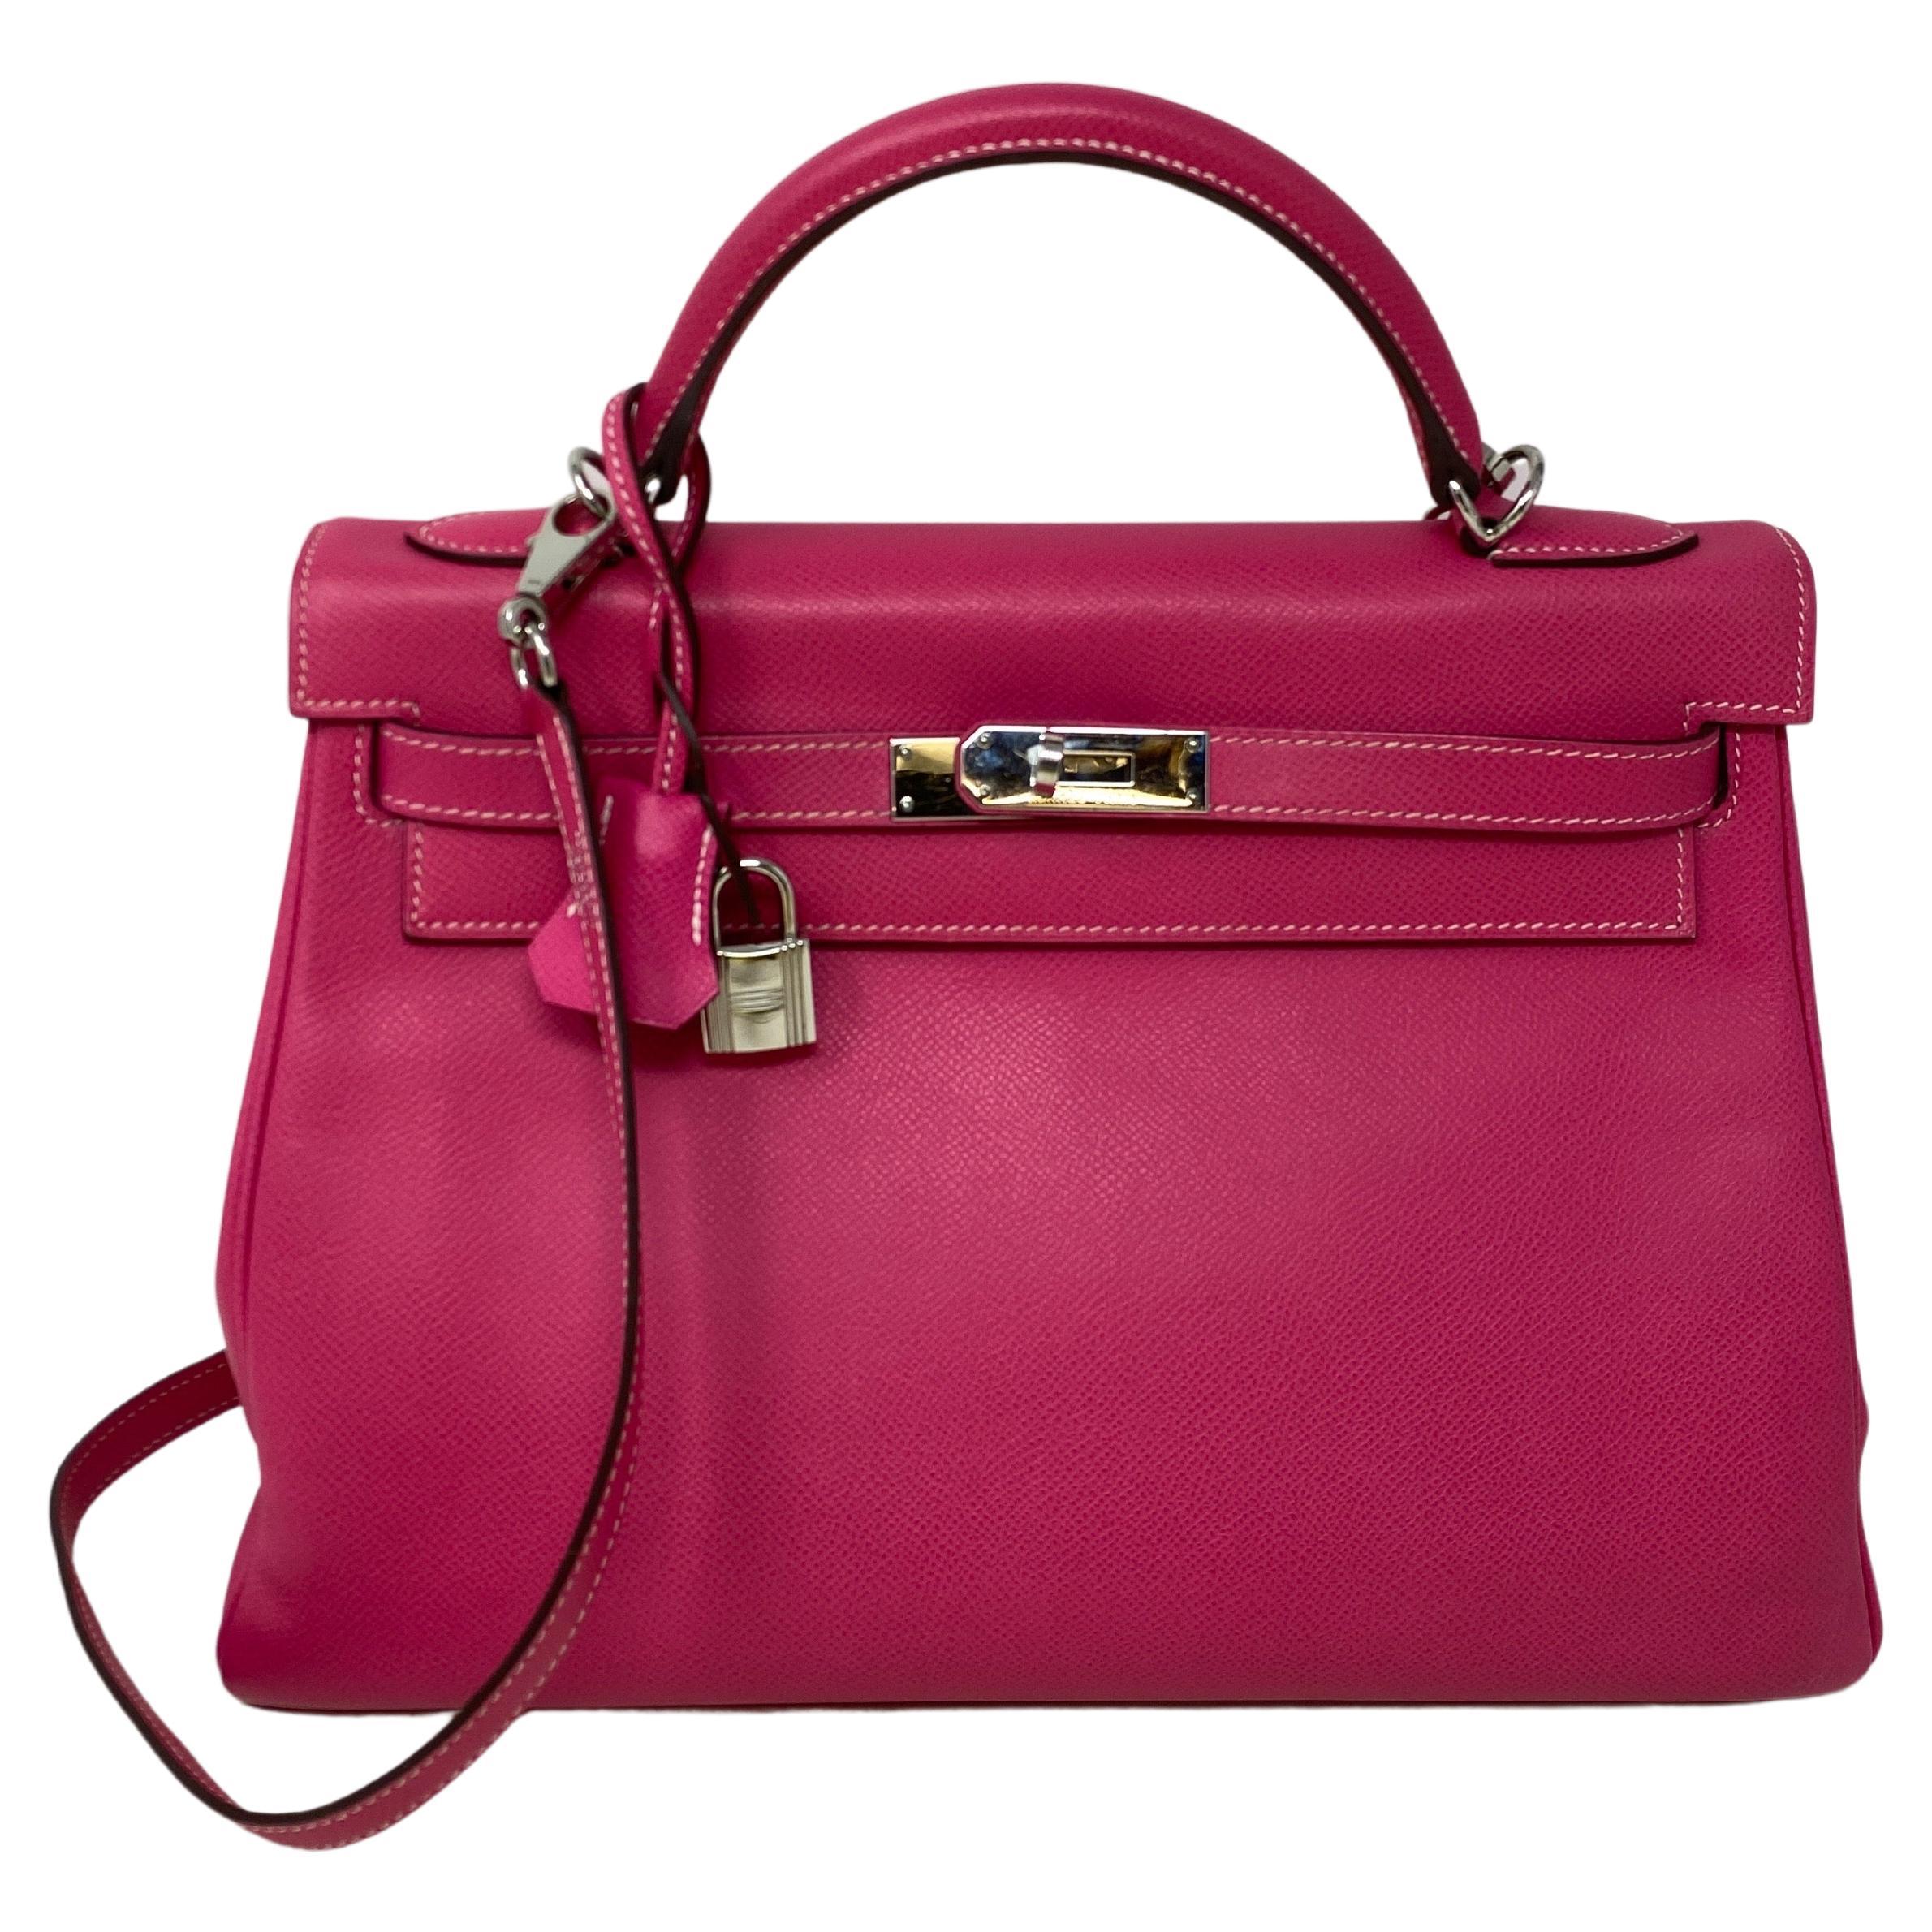 Hermes Kelly 32 Rose Tyrien Bag. Excellent like new condition. Bright hot pink color epsom leather. Palladium silver hardware. Candy collection. Interior is rubis red and exterior rose tyrien color. Clean interior. Includes clochette, lock, keys,